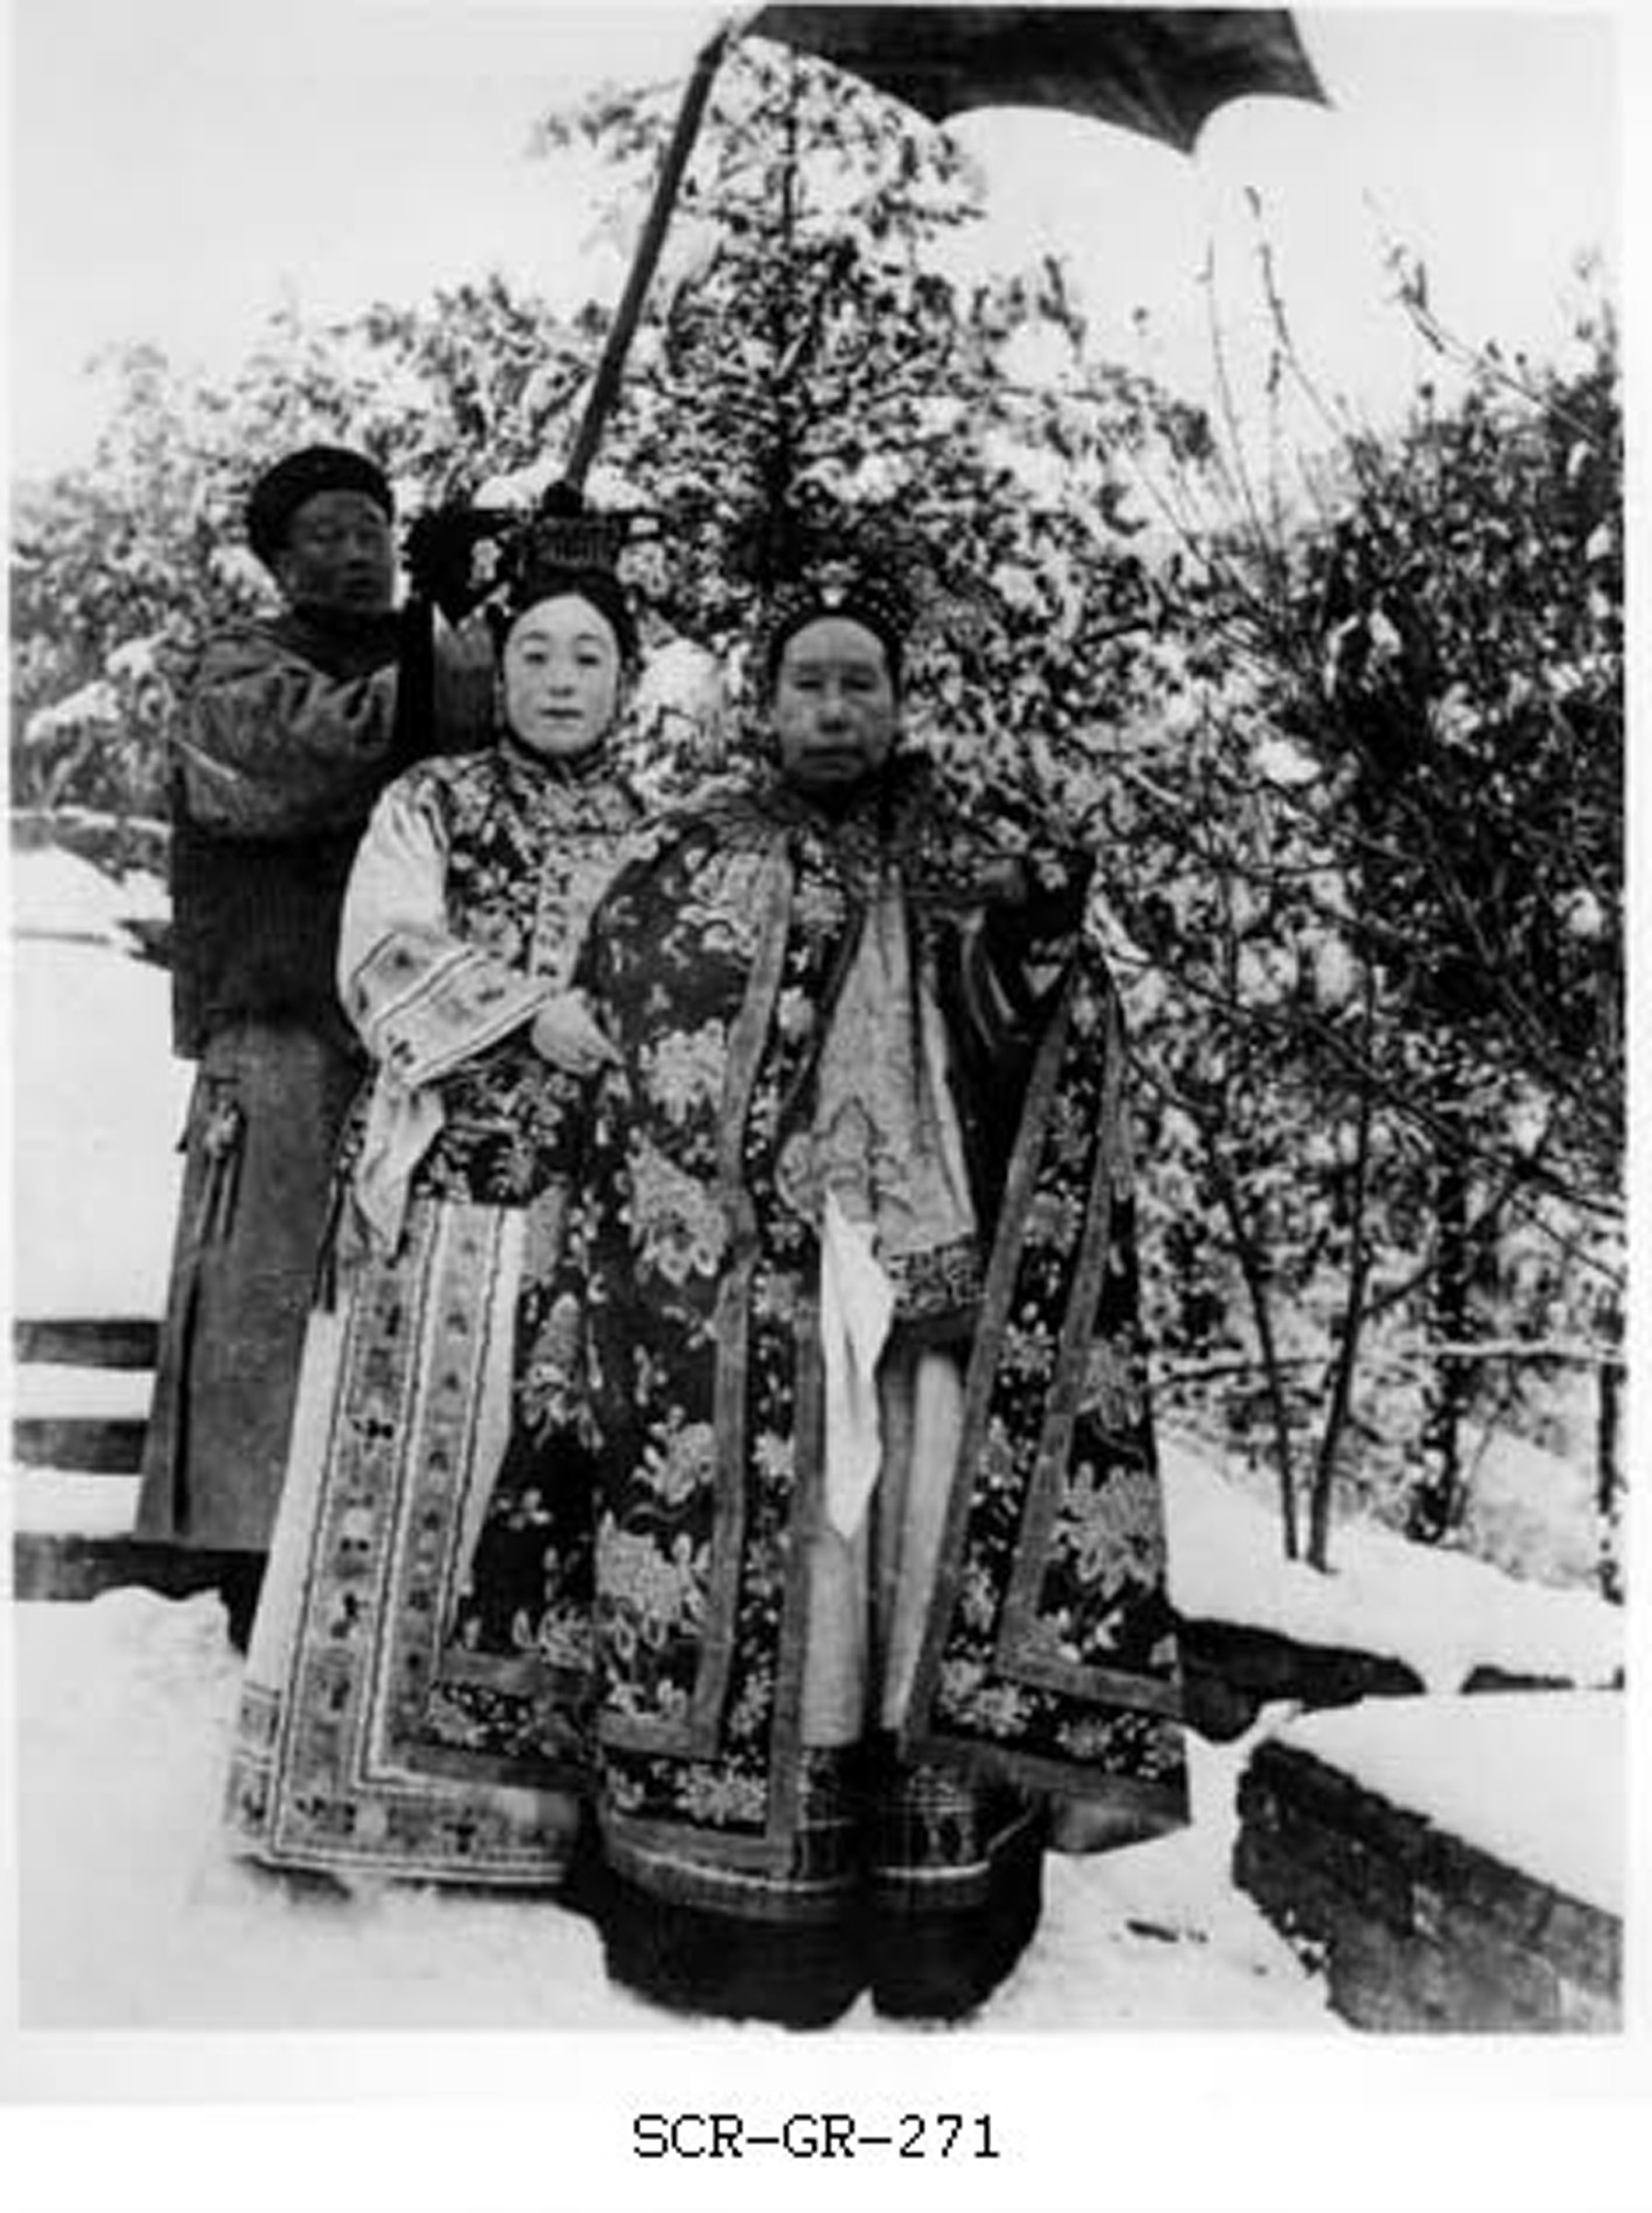 Der Ling and Cixi, with eunuch Cui Yugui holding an umbrella for them, on Peony Hill at the Summer Palace in 1904. Der Ling looks visibly cold in the photo, but Empress Dowager was a great lover of outdoor activities regardless of the weather. Photos: Hong Kong University Press